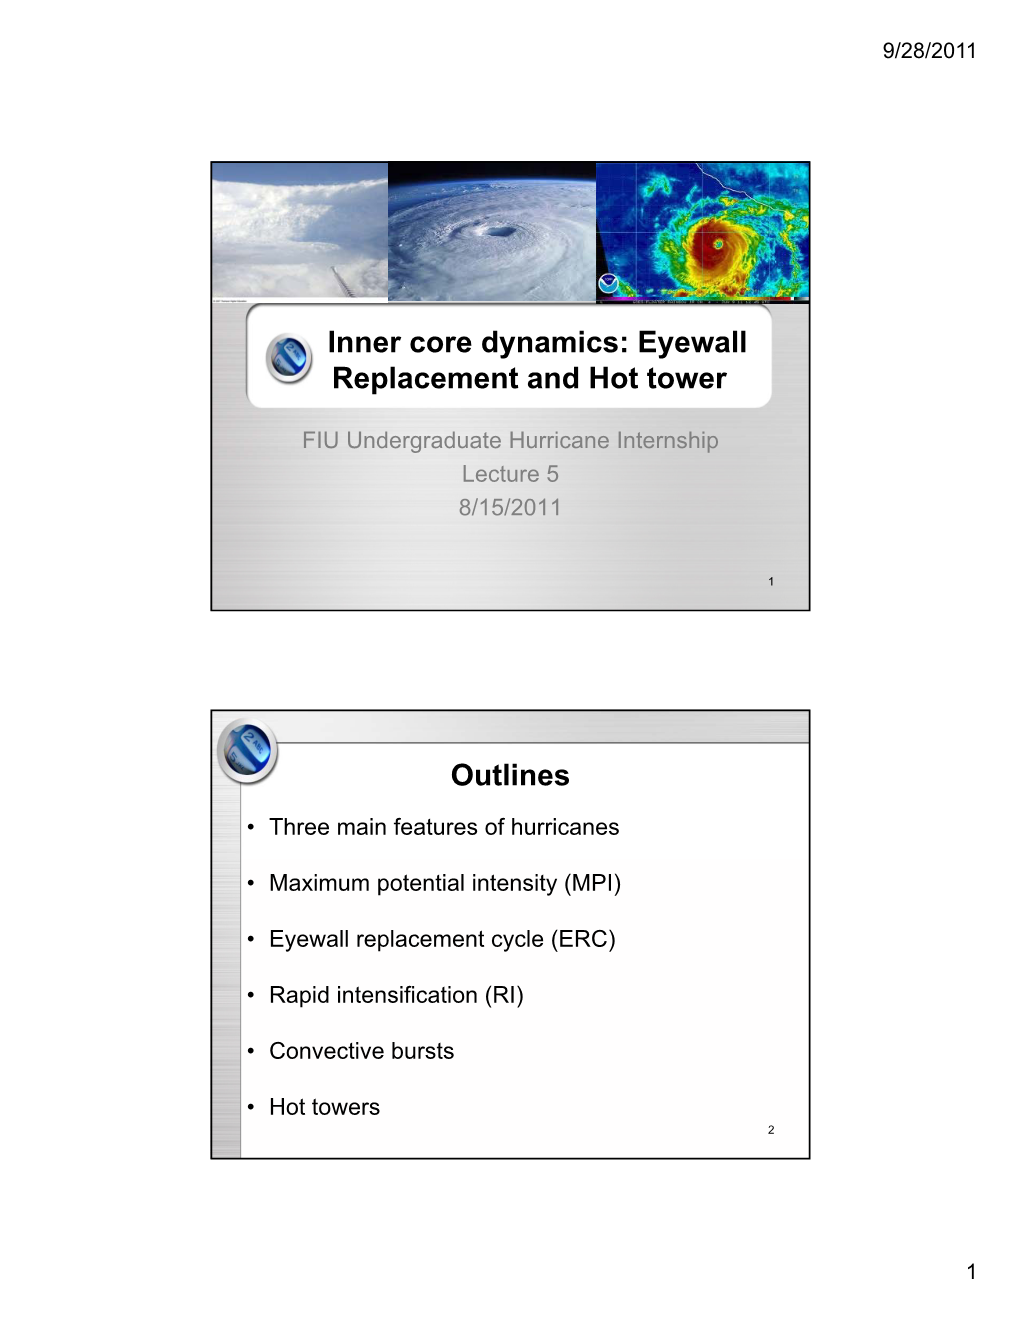 Inner Core Dynamics: Eyewall Replacement and Hot Tower Outlines